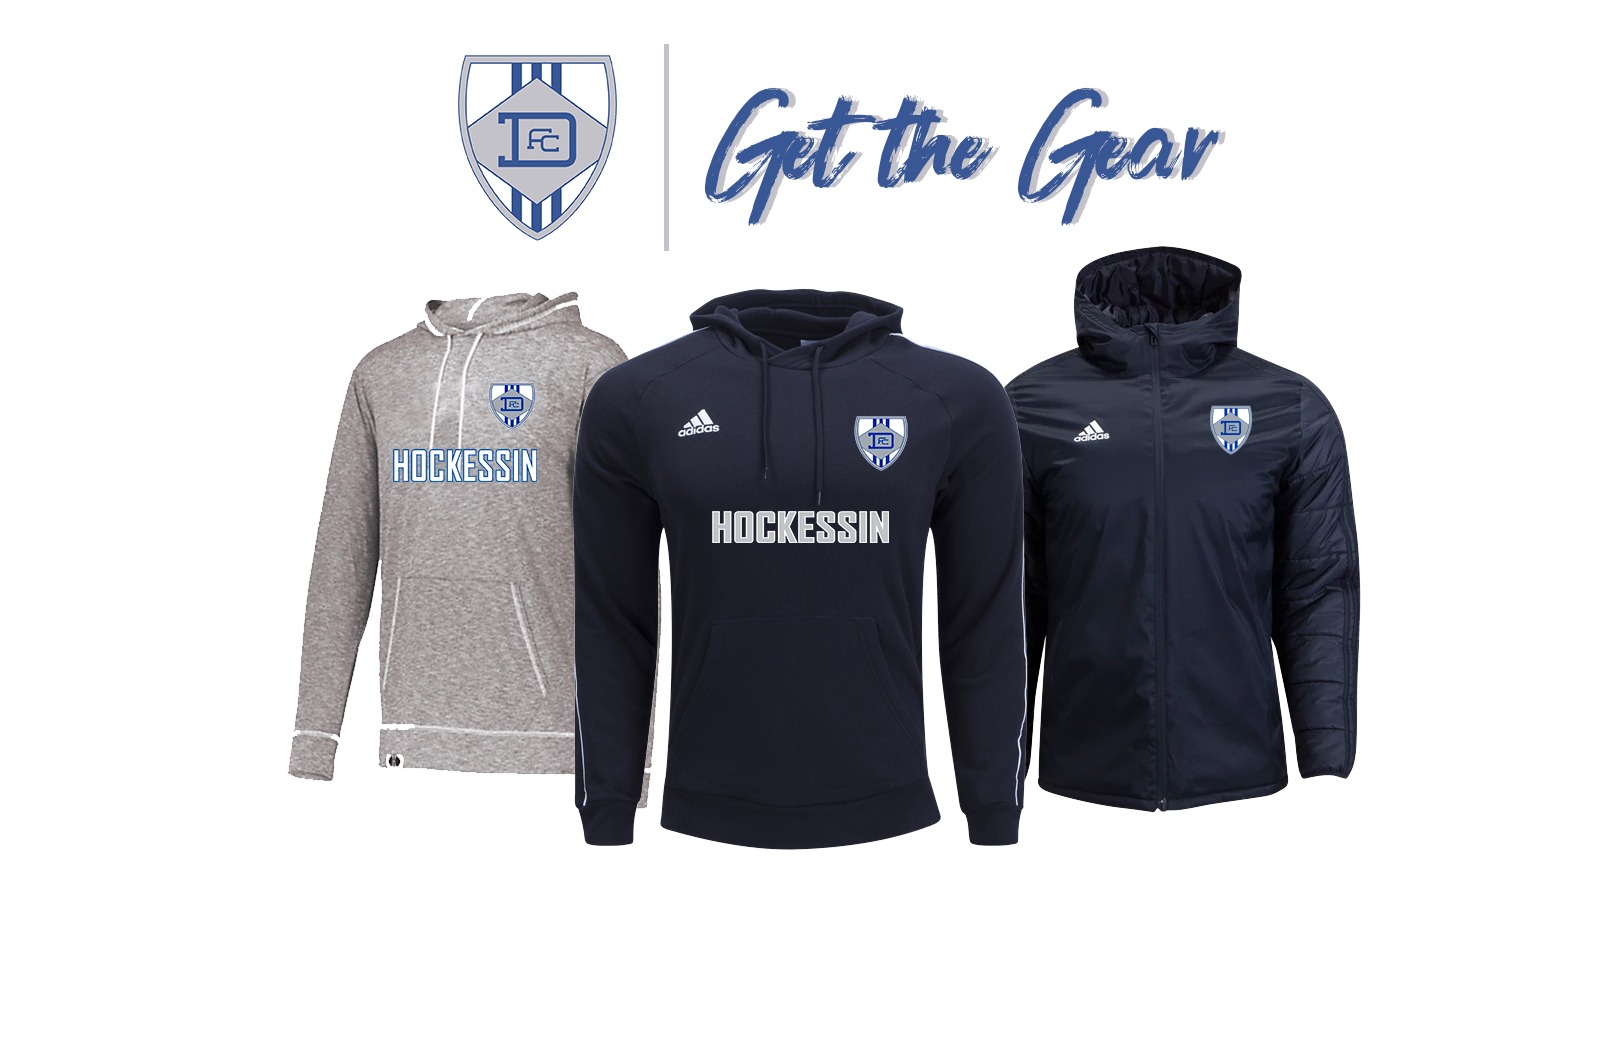 Get the Gear! Spirit Wear Available.